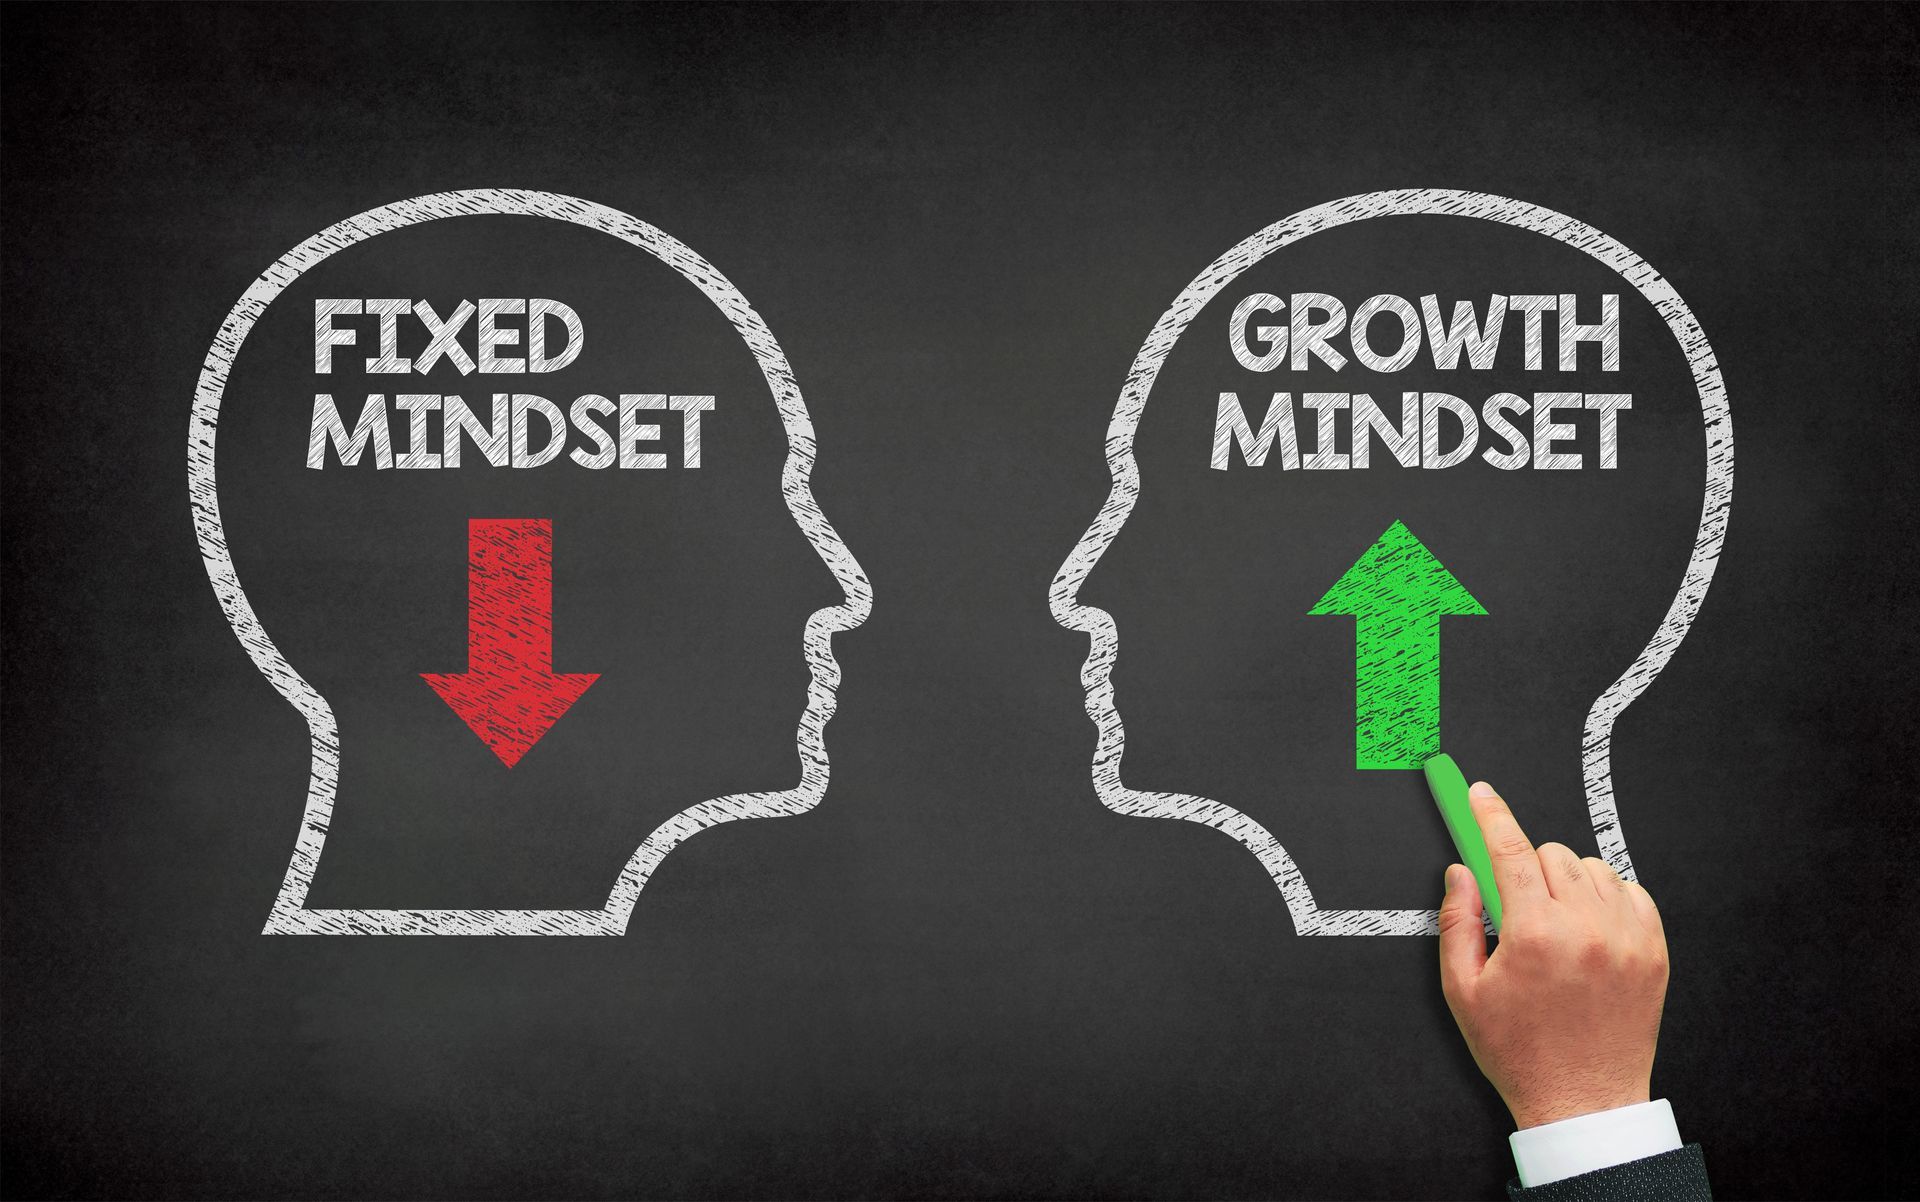 Growth Mindset with Fixed Mindset concept on chalkboard